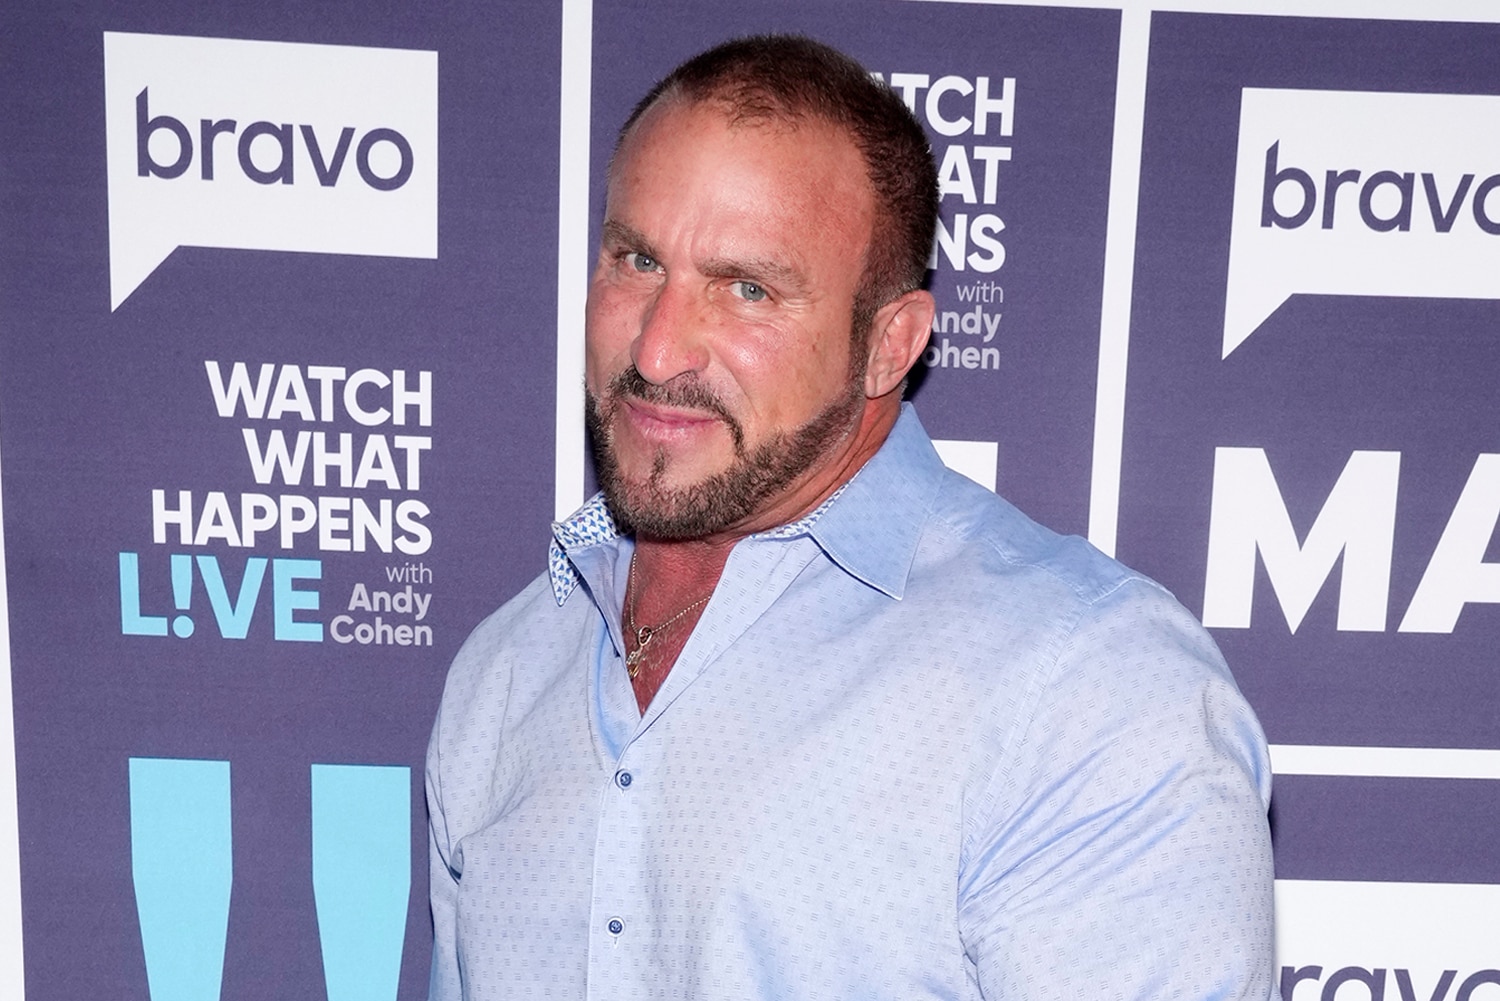 Frank Catania's New Girlfriend Brittany on WWHL: Photos, Details | The Daily Dish